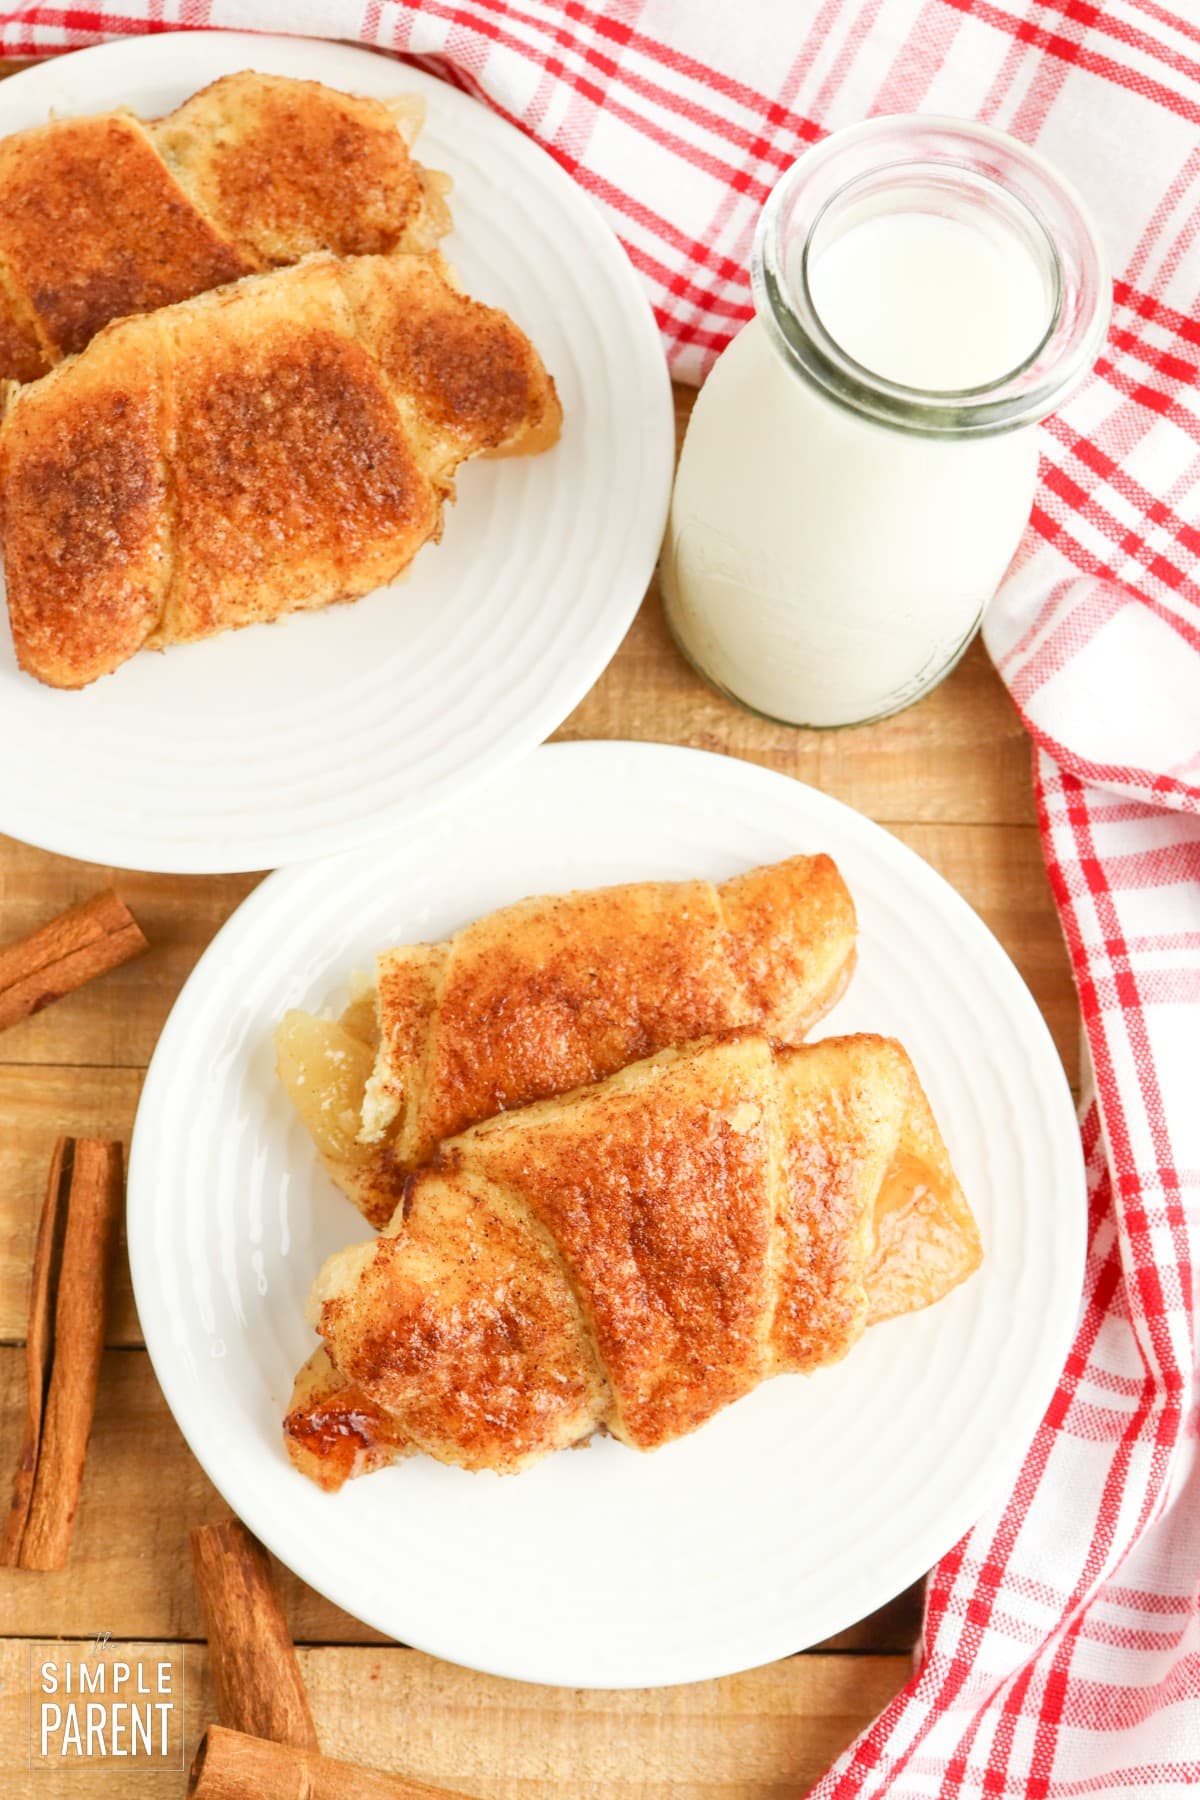 Apple crescent rolls on white plate with red and white napkin and glass of milk